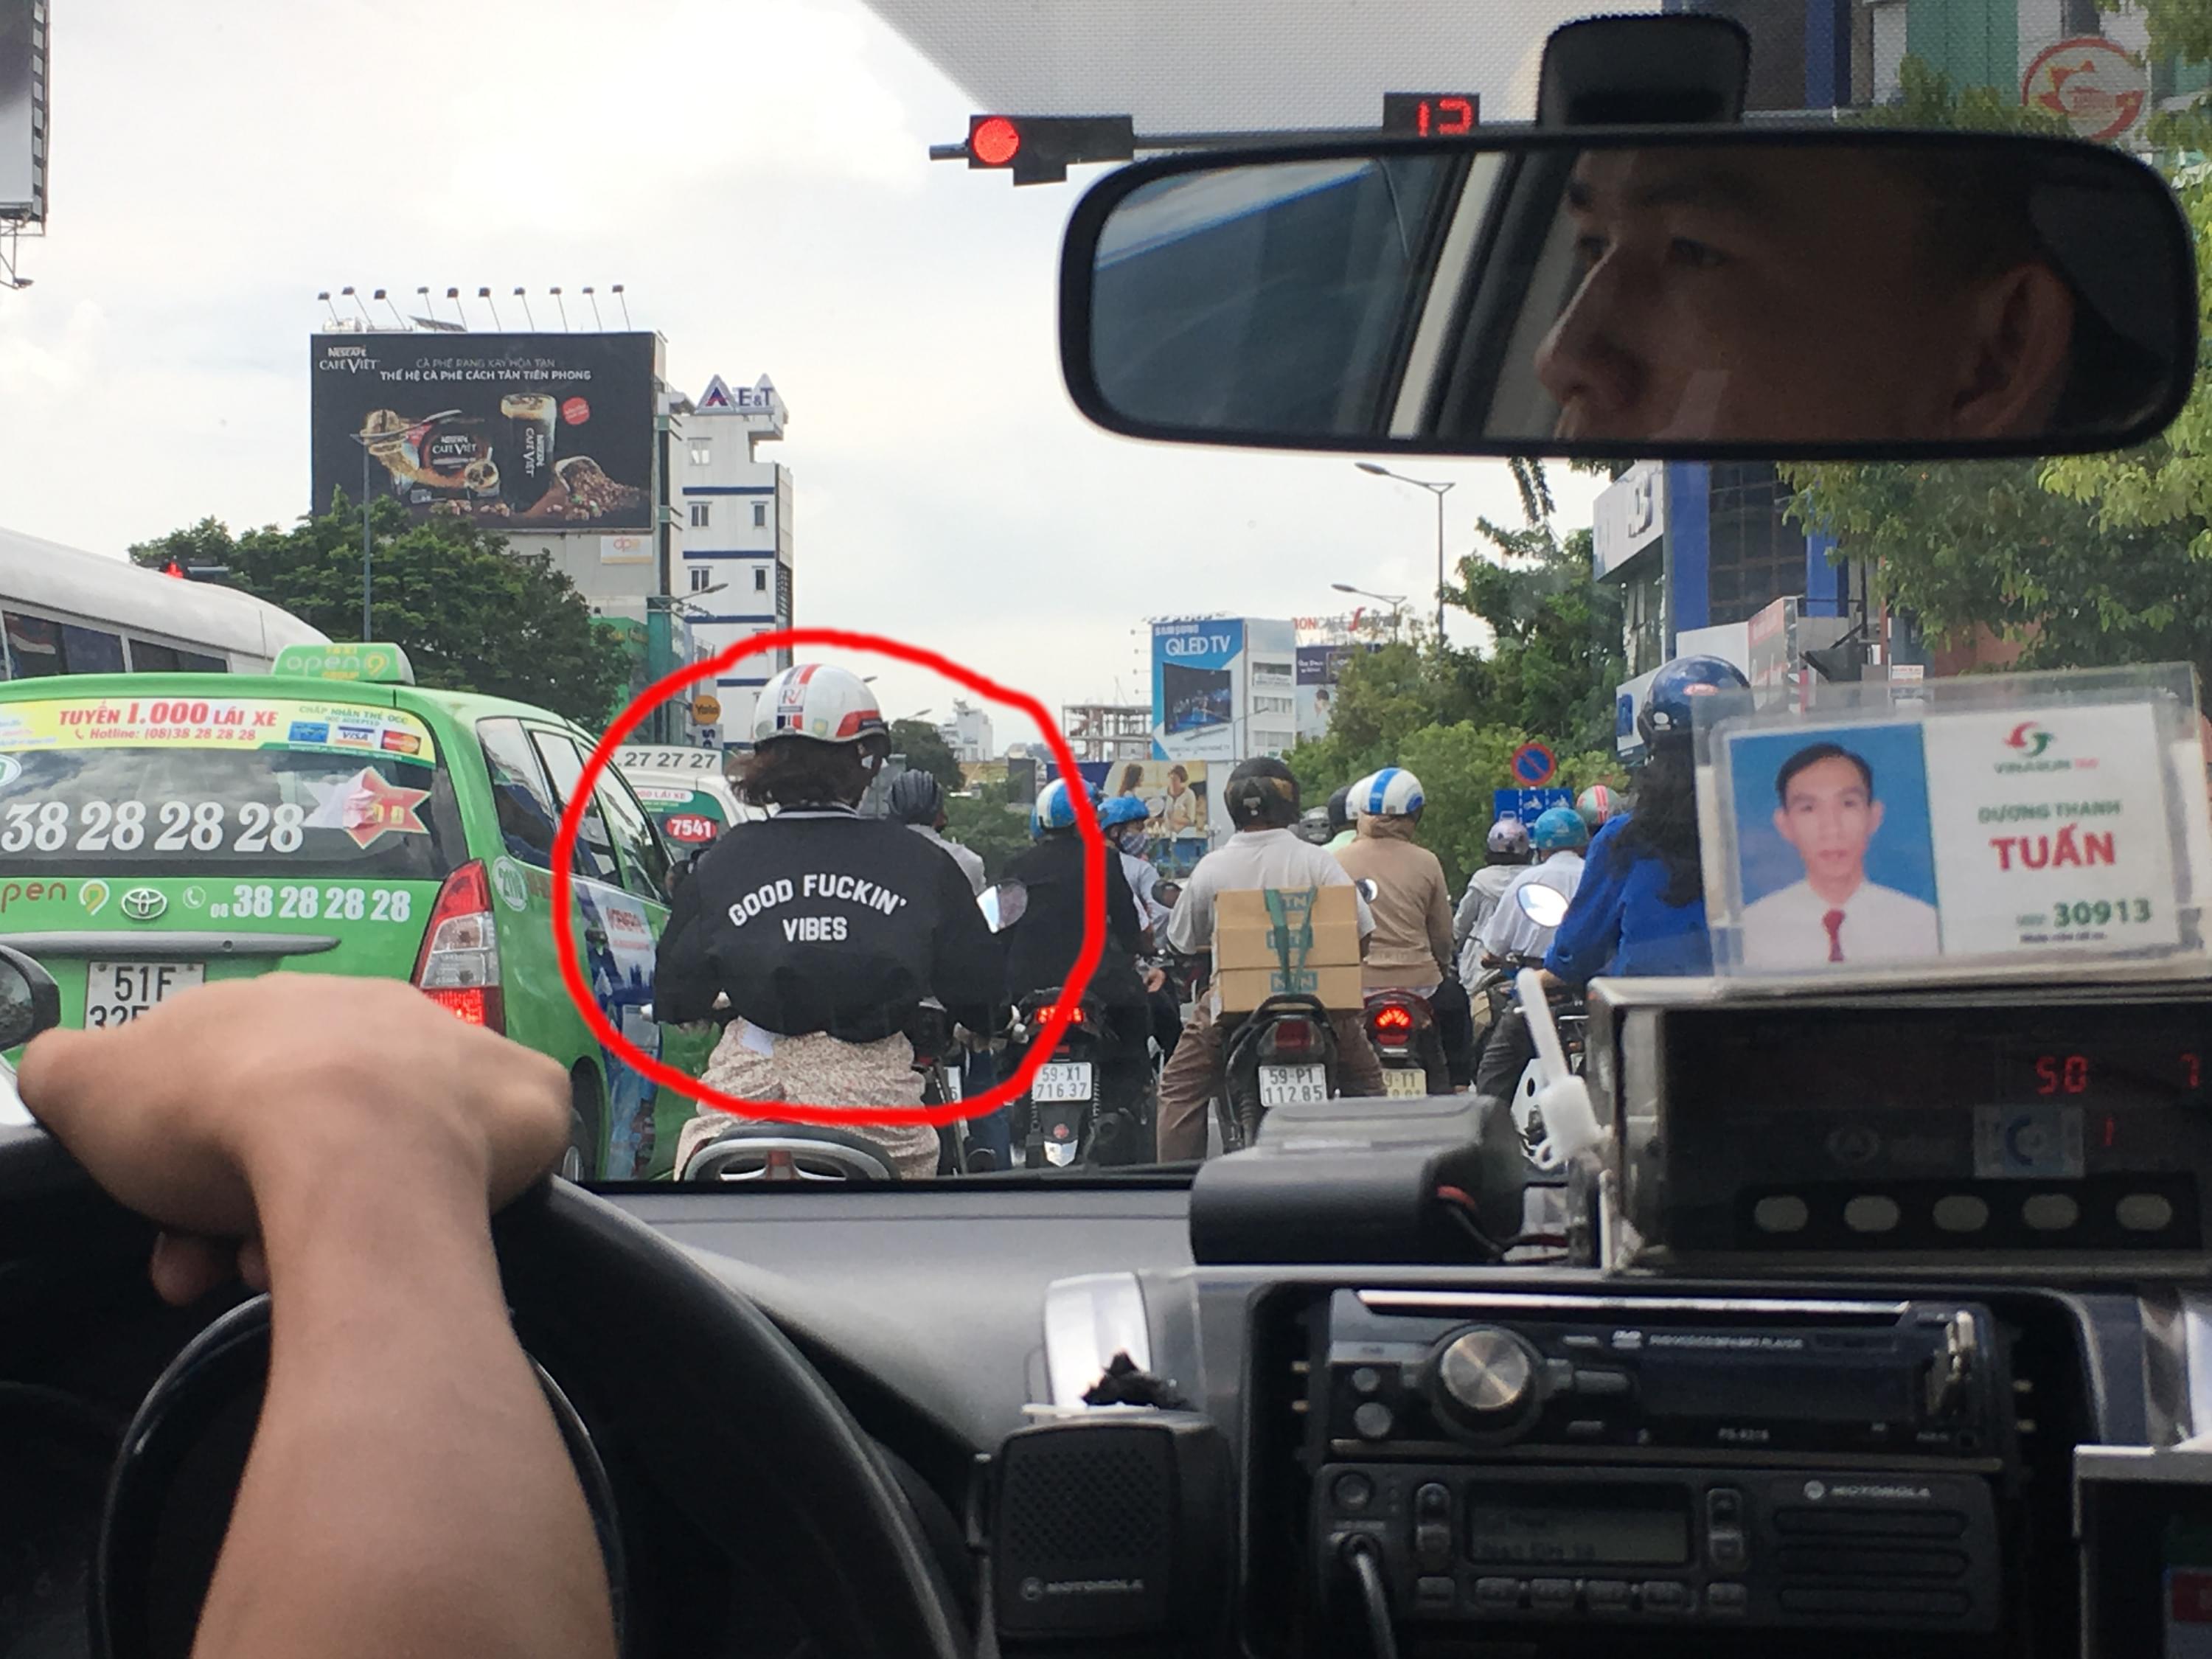 On arrival in Saigon, in the back of a cab, Dave spots a motorbike driver with a jacket saying "Good Fuckin' Vibes"